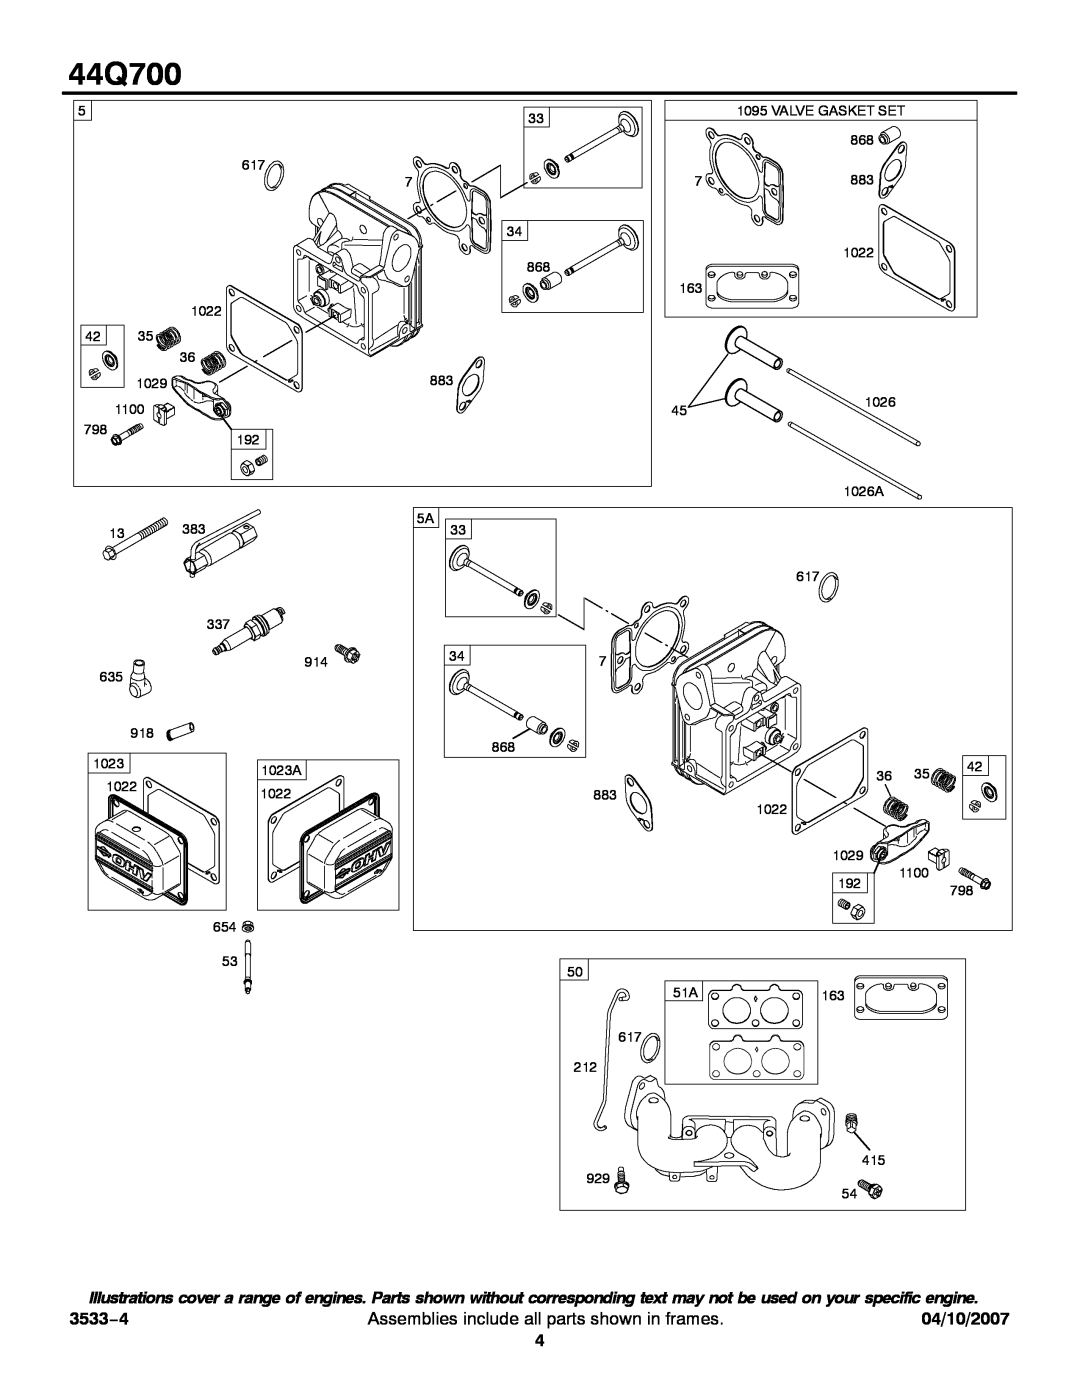 Briggs & Stratton 44Q700 service manual 3533−4, Assemblies include all parts shown in frames, 04/10/2007 